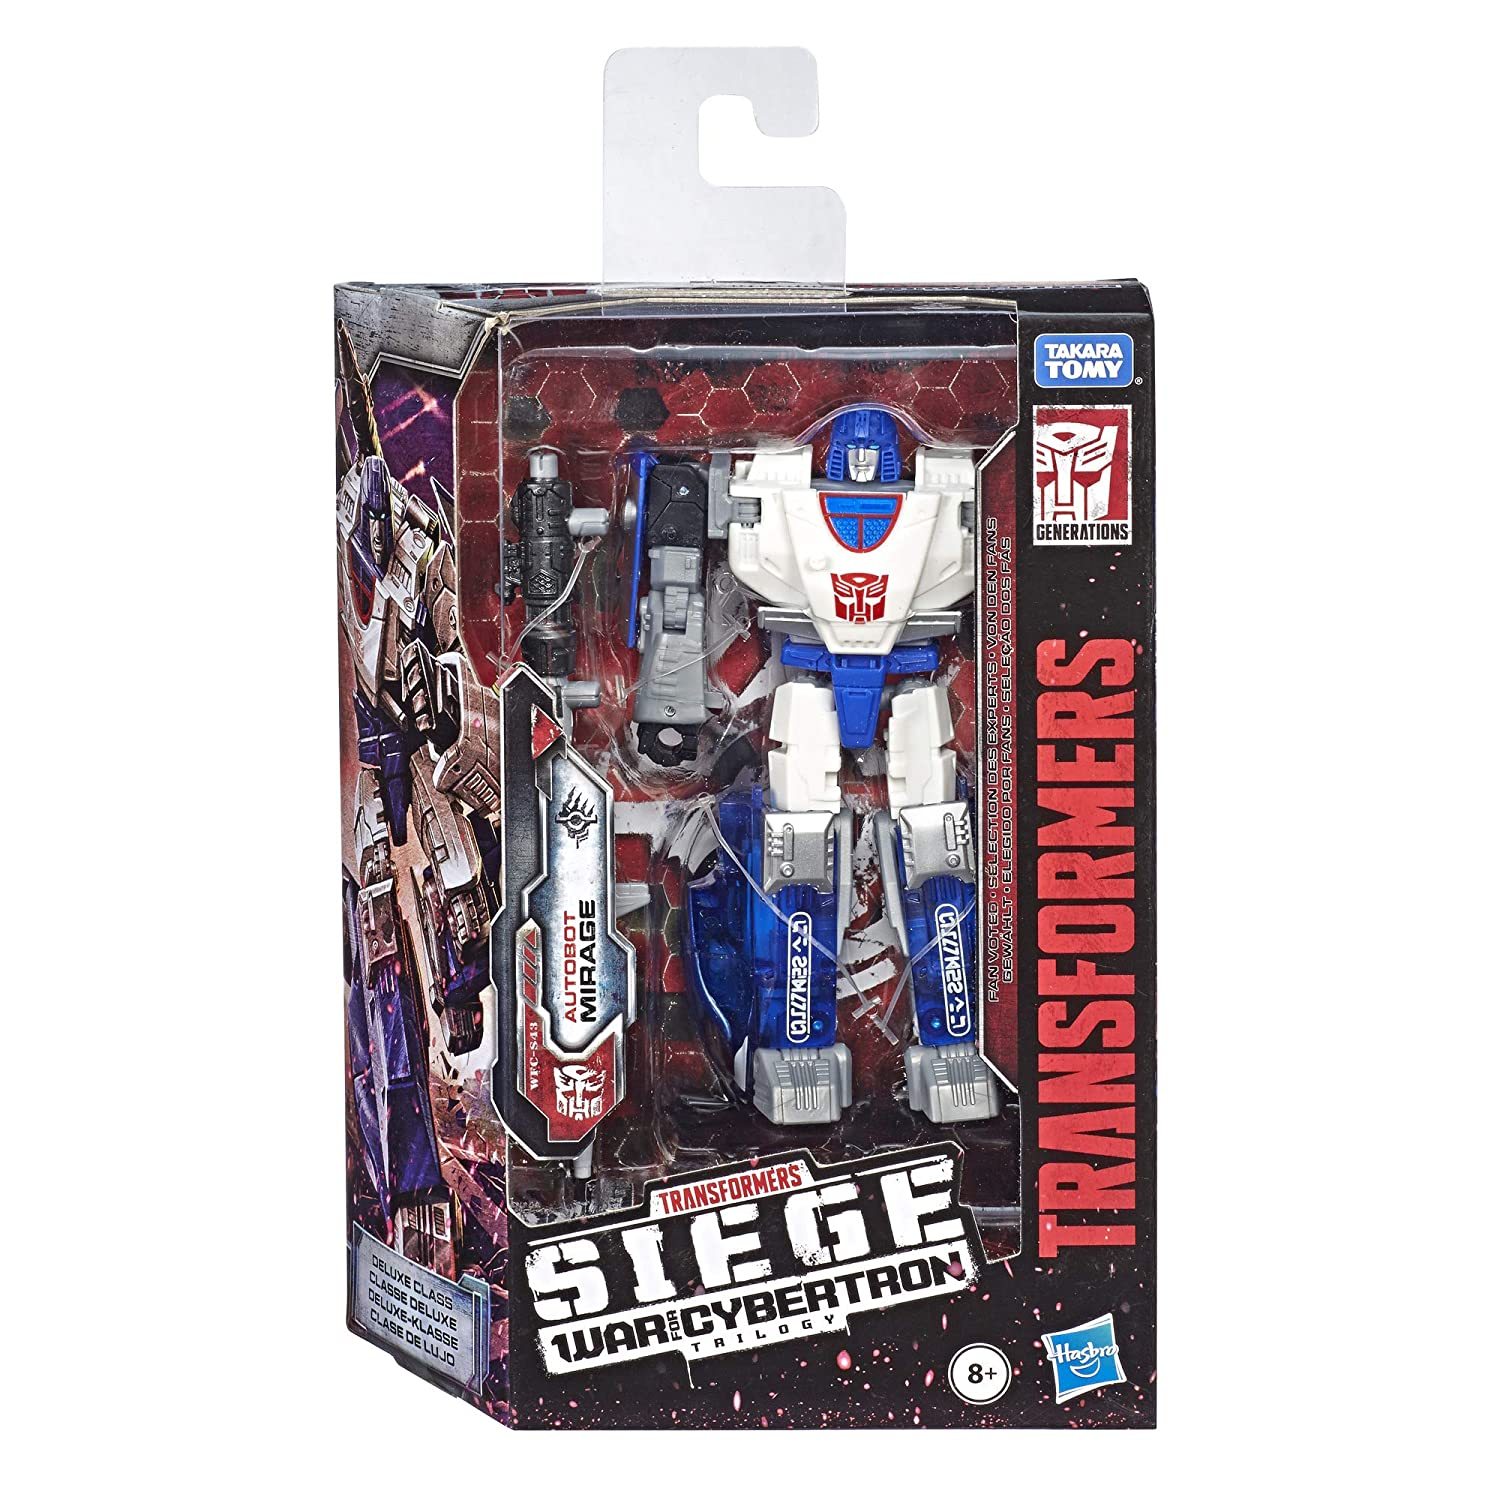 Transformers Figure Generations War for Cybertron Autobot Impactor New in Box - $57.00